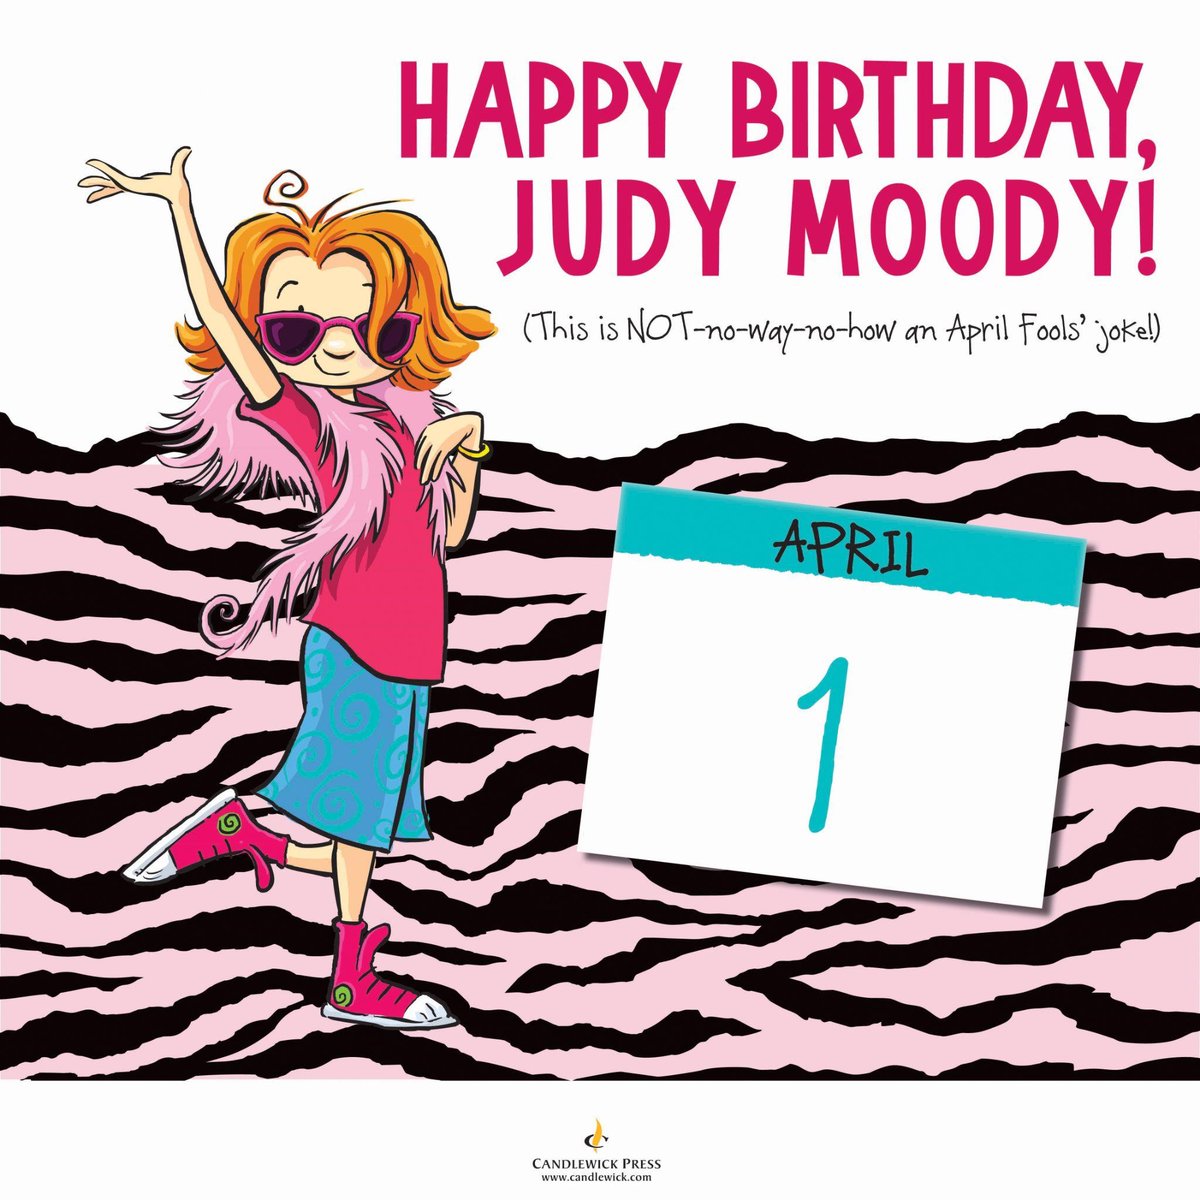 Dear Judy Moody, HAPPY BIRTHDAY TO YOU! What is your absolute favorite Judy Moody book? Hint: we love them all 💓